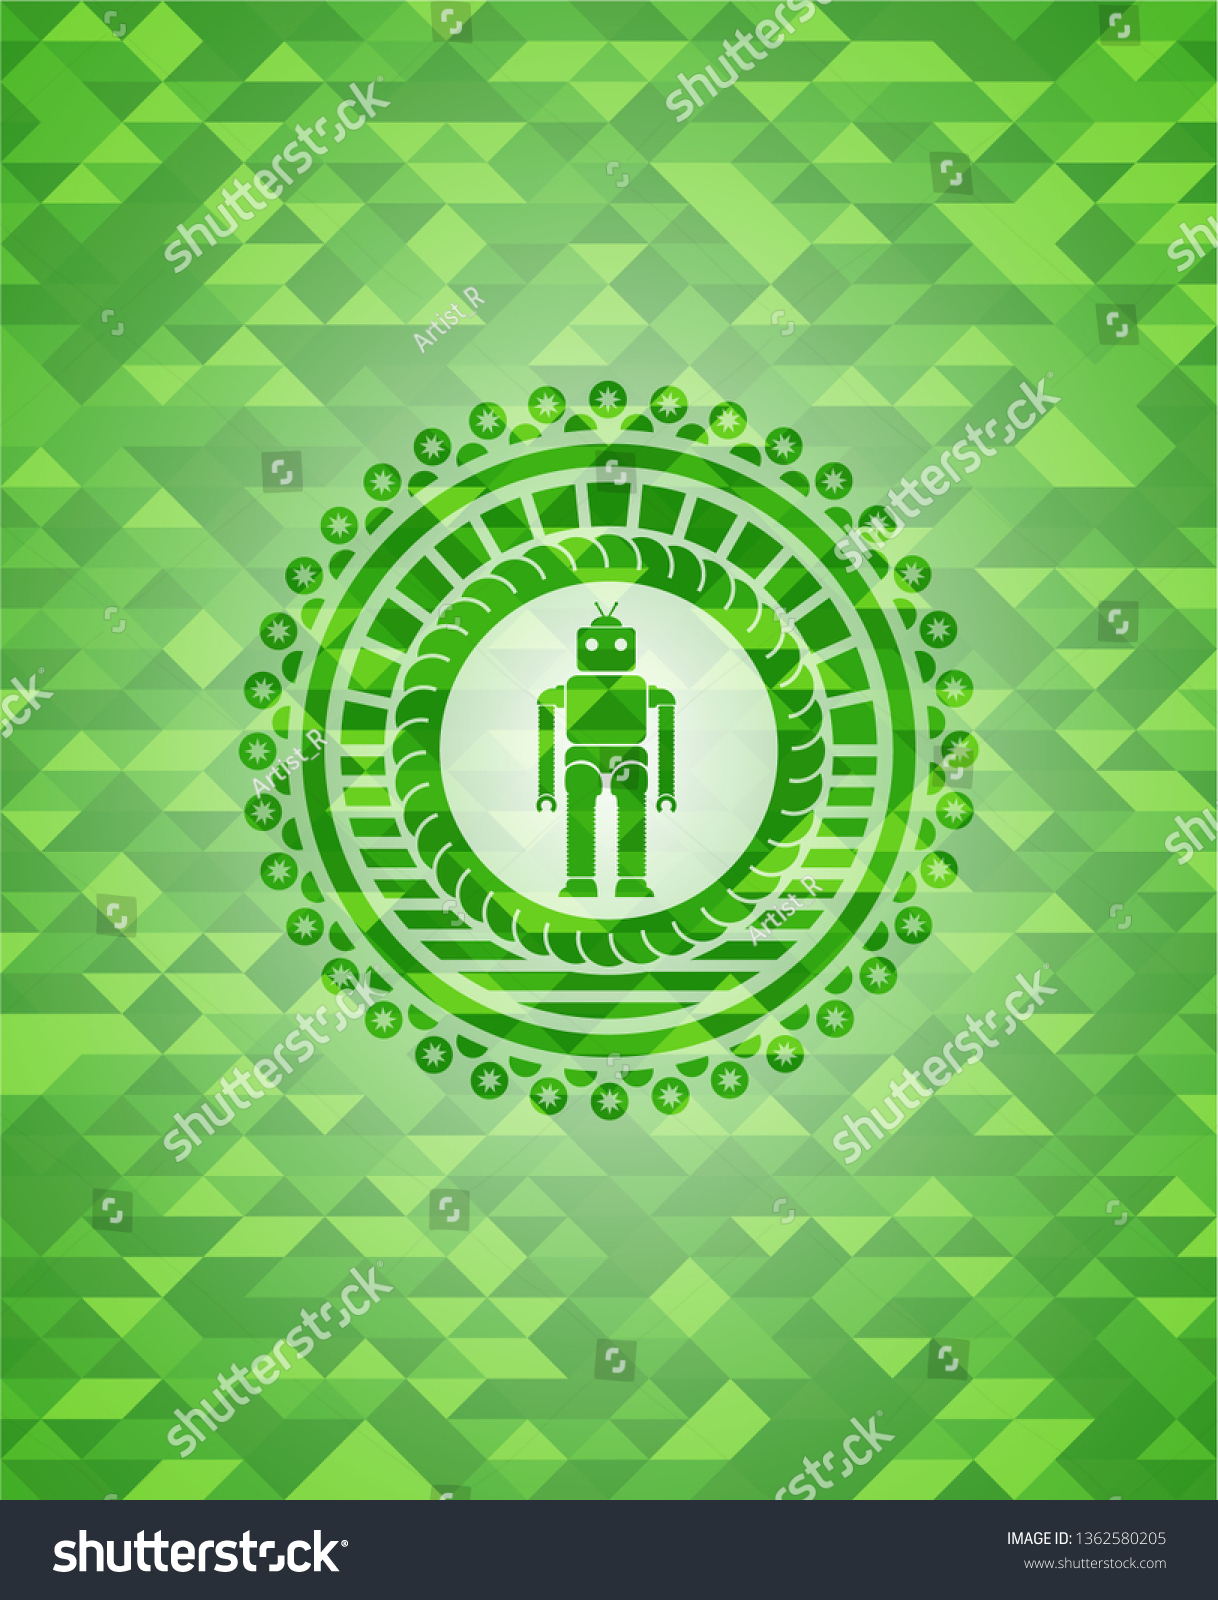 robot icon inside green emblem with triangle mosaic background #1362580205